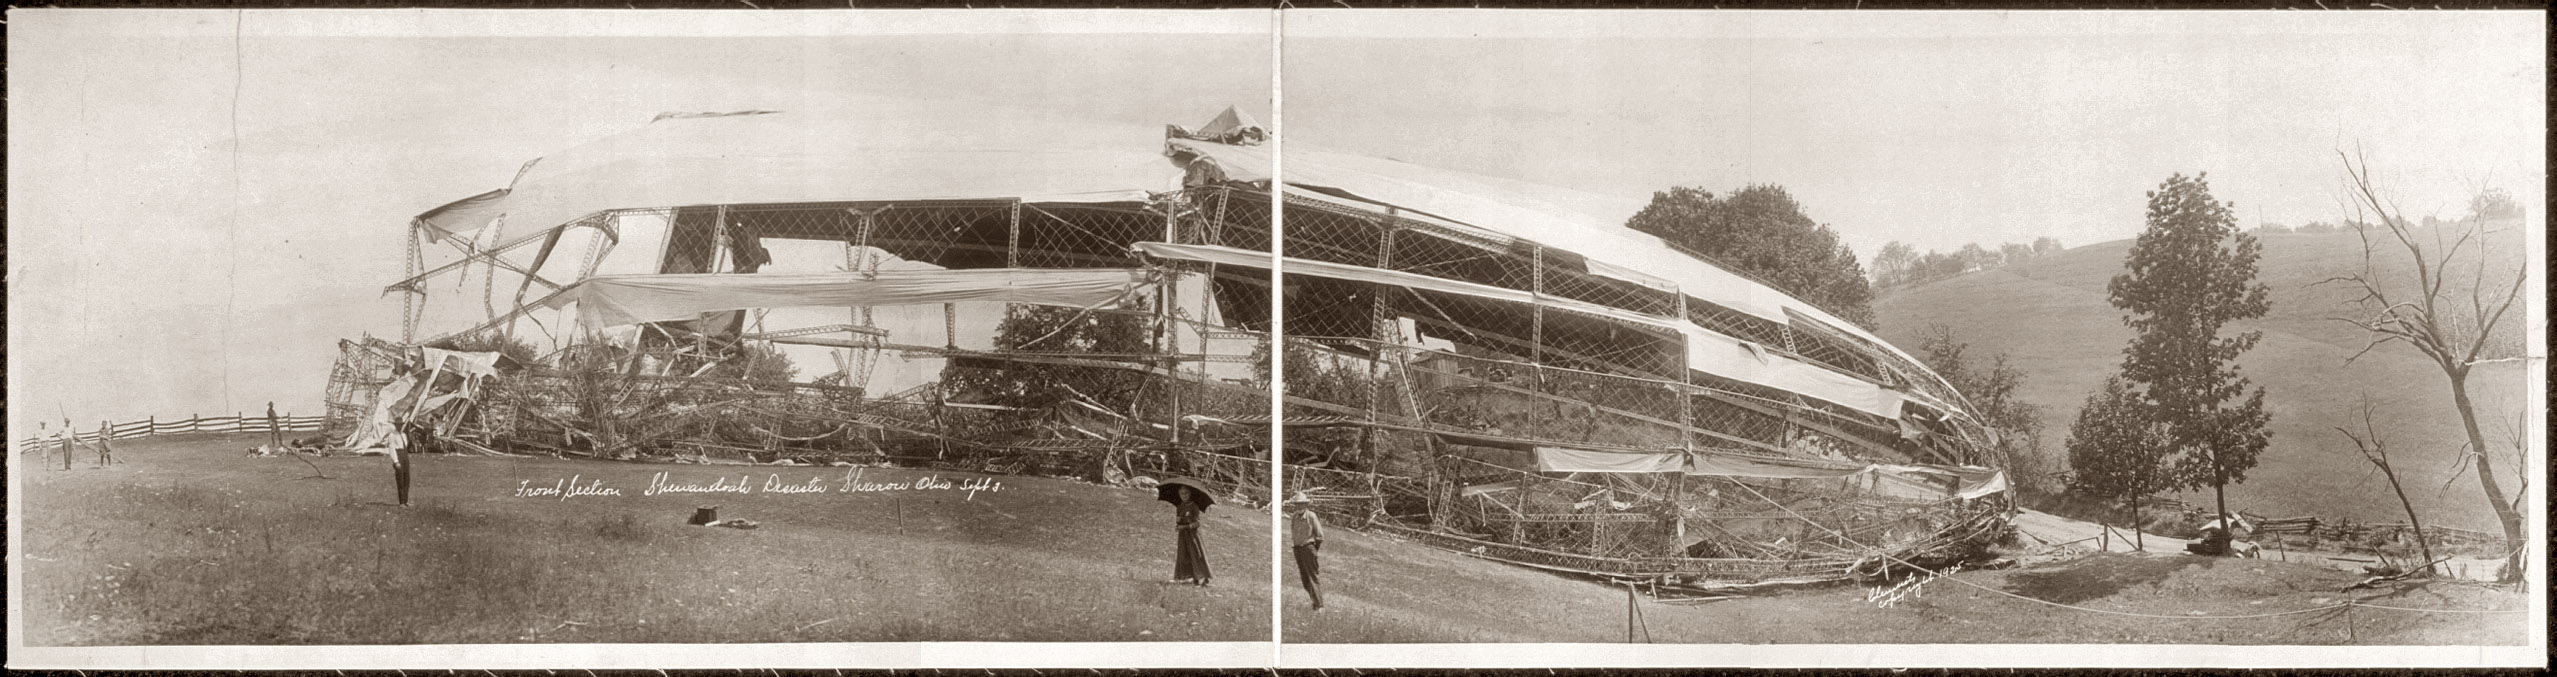 Sept.3, 1925. Front of the USS Shenandoah near Sharon, Ohio, the day after it fell to earth in three sections with the loss of 14 lives. Twenty-nine survived. Panoramic photo by Rell Sam Clements. View full size.